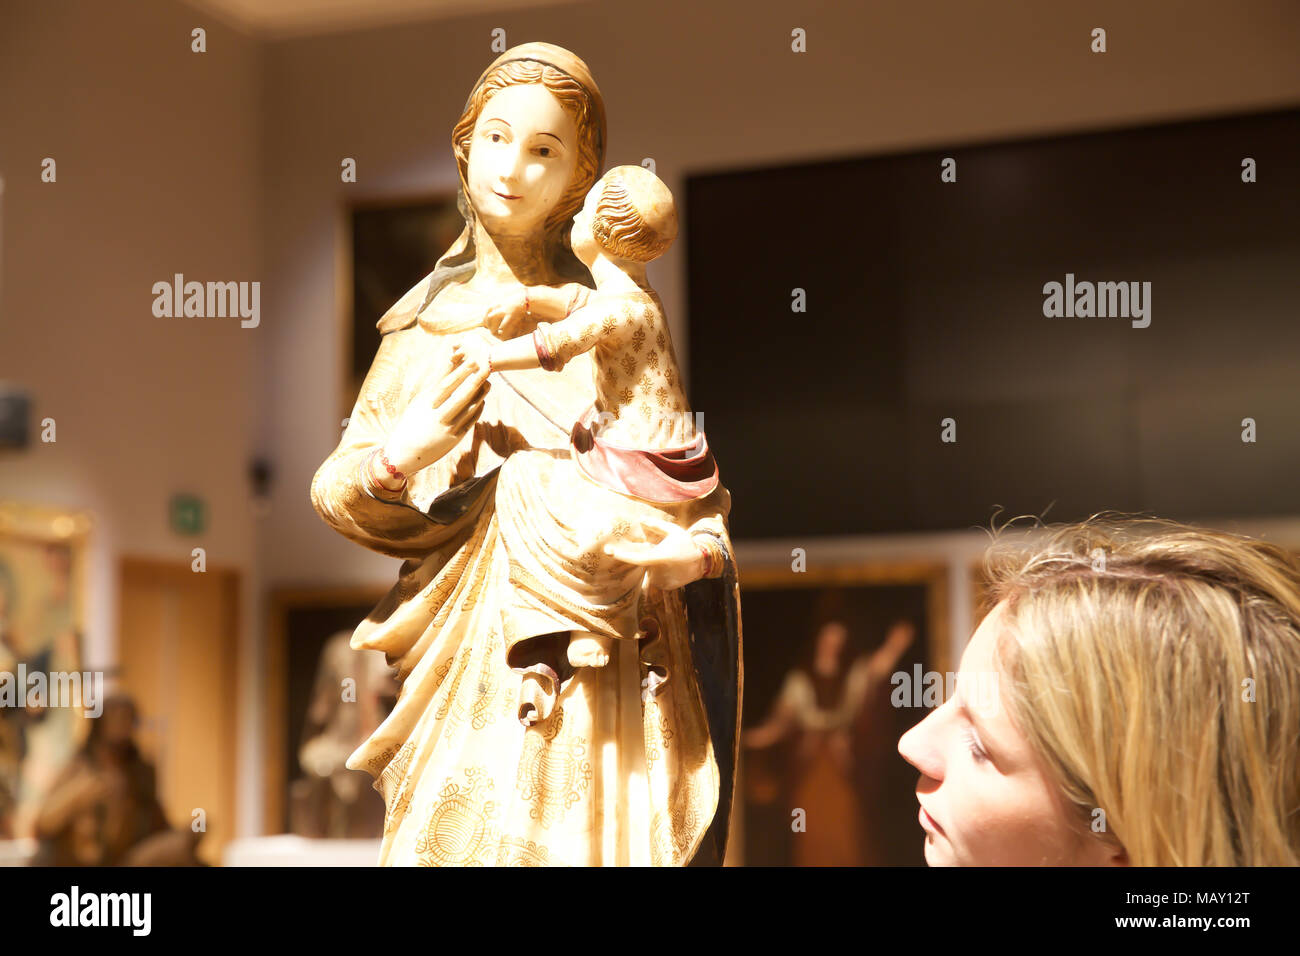 London,UK,5th April 2018,A Photocall took place at Bonhams of a private art collection from Spanish Master Sculptor Antón Casamor. Highlights include: A SICILIAN 15TH CENTURY POLYCHROME AND GILT ALABASTER FIGURE OF THE 'TRAPANI MADONNA' Estimated at £ 15,000 - 25,000. The sale takes place on the 11th April 2018 Credit: Keith Larby/Alamy Live News Credit: Keith Larby/Alamy Live News Stock Photo